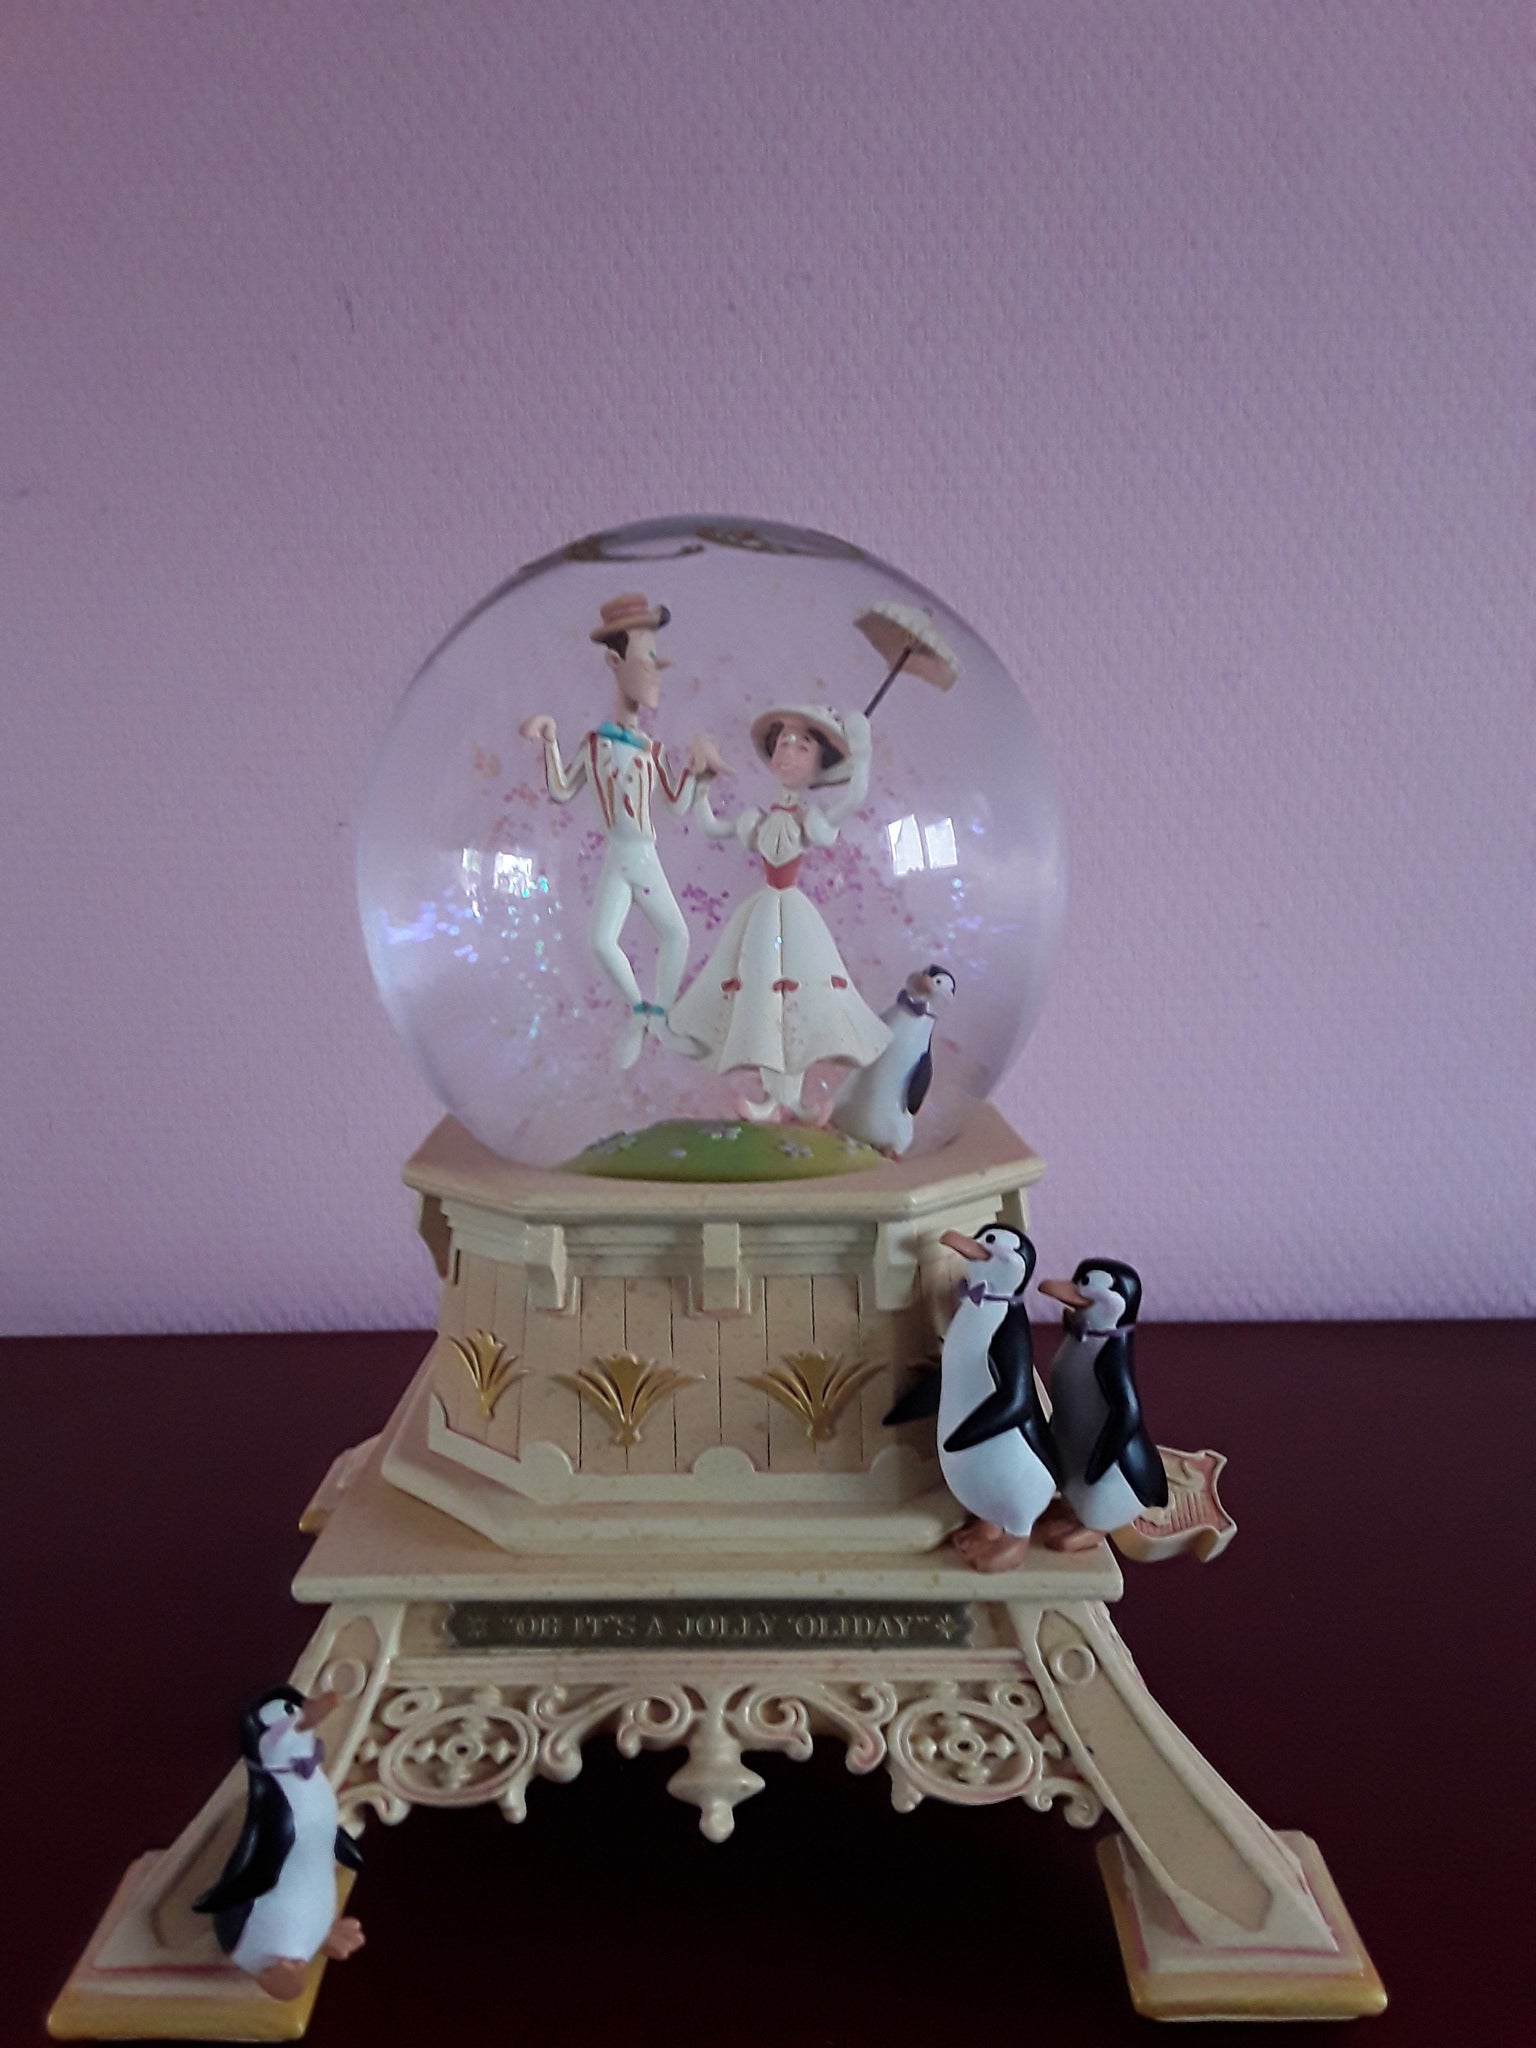 Mary Poppins Limited Snowglobe